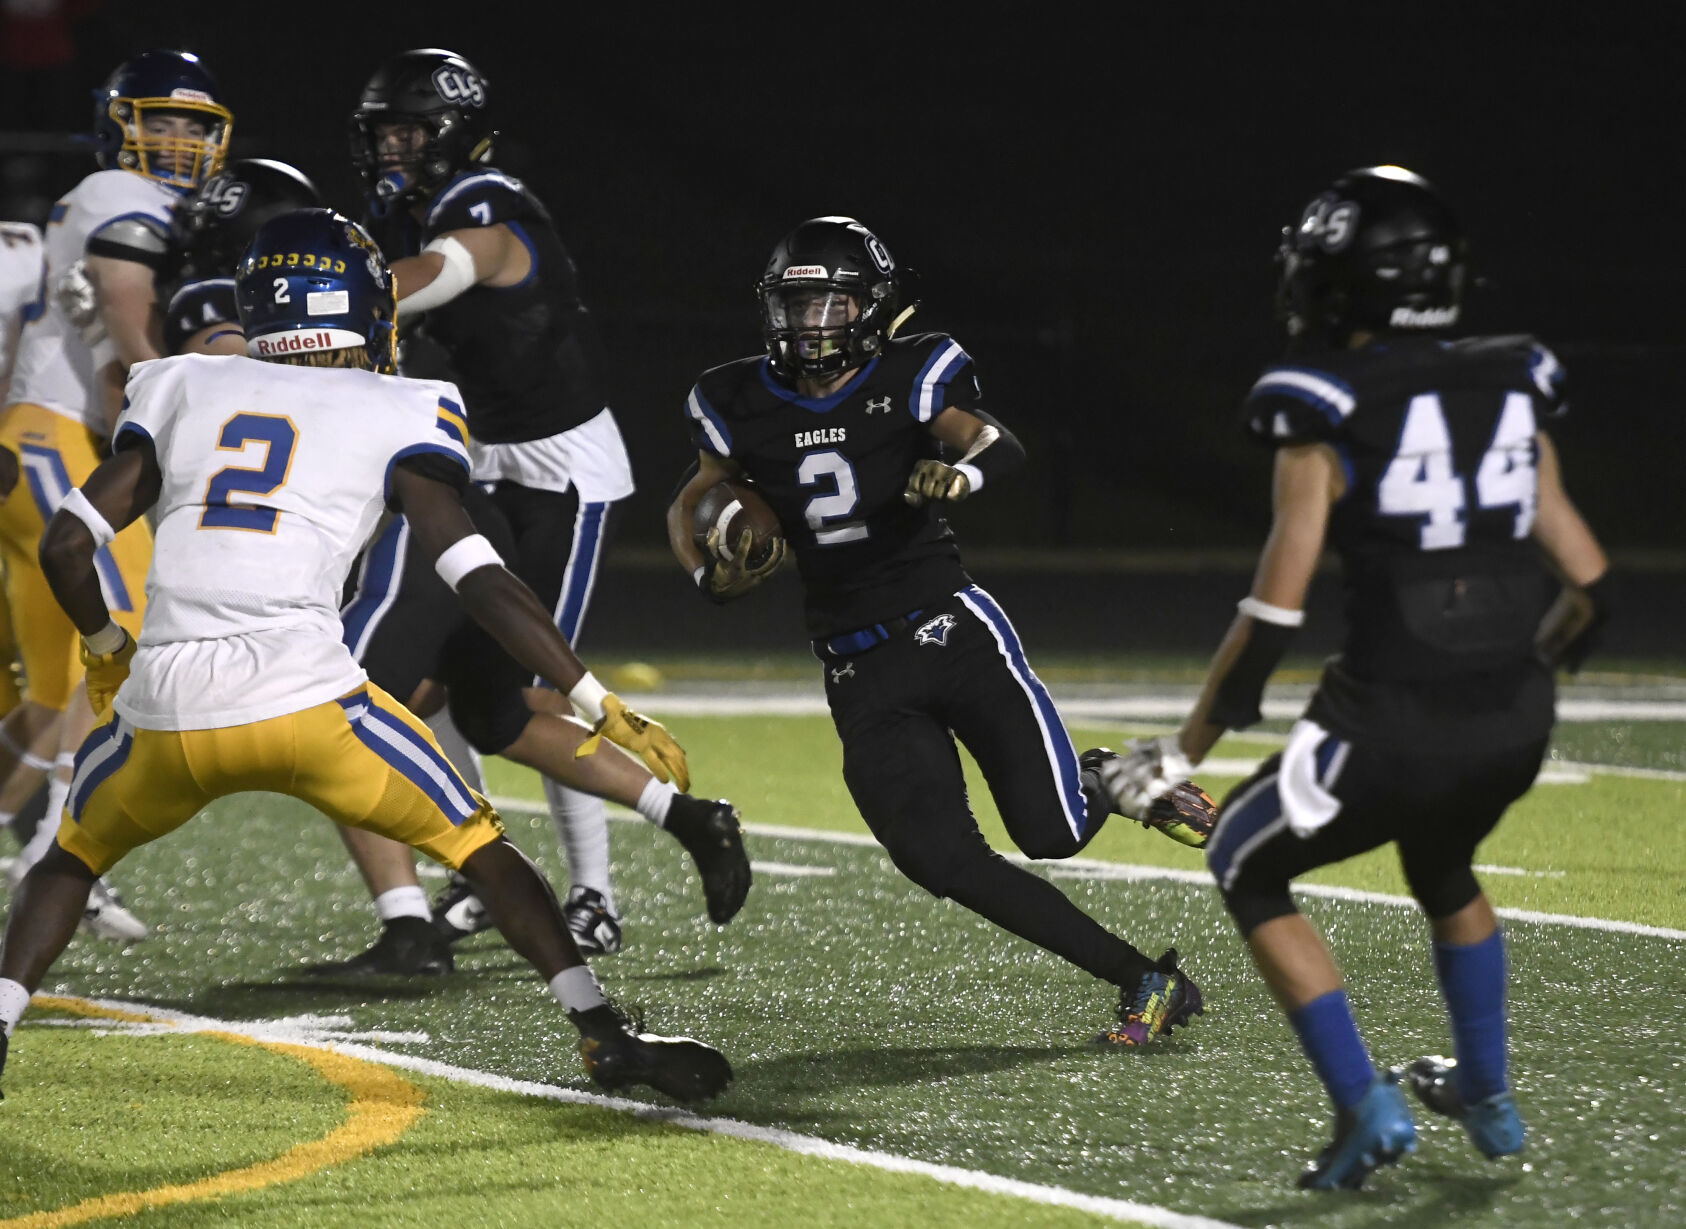 Kenosha Christian Life Faces Setback in Loss to Racine Lutheran but maintains playoff hopes